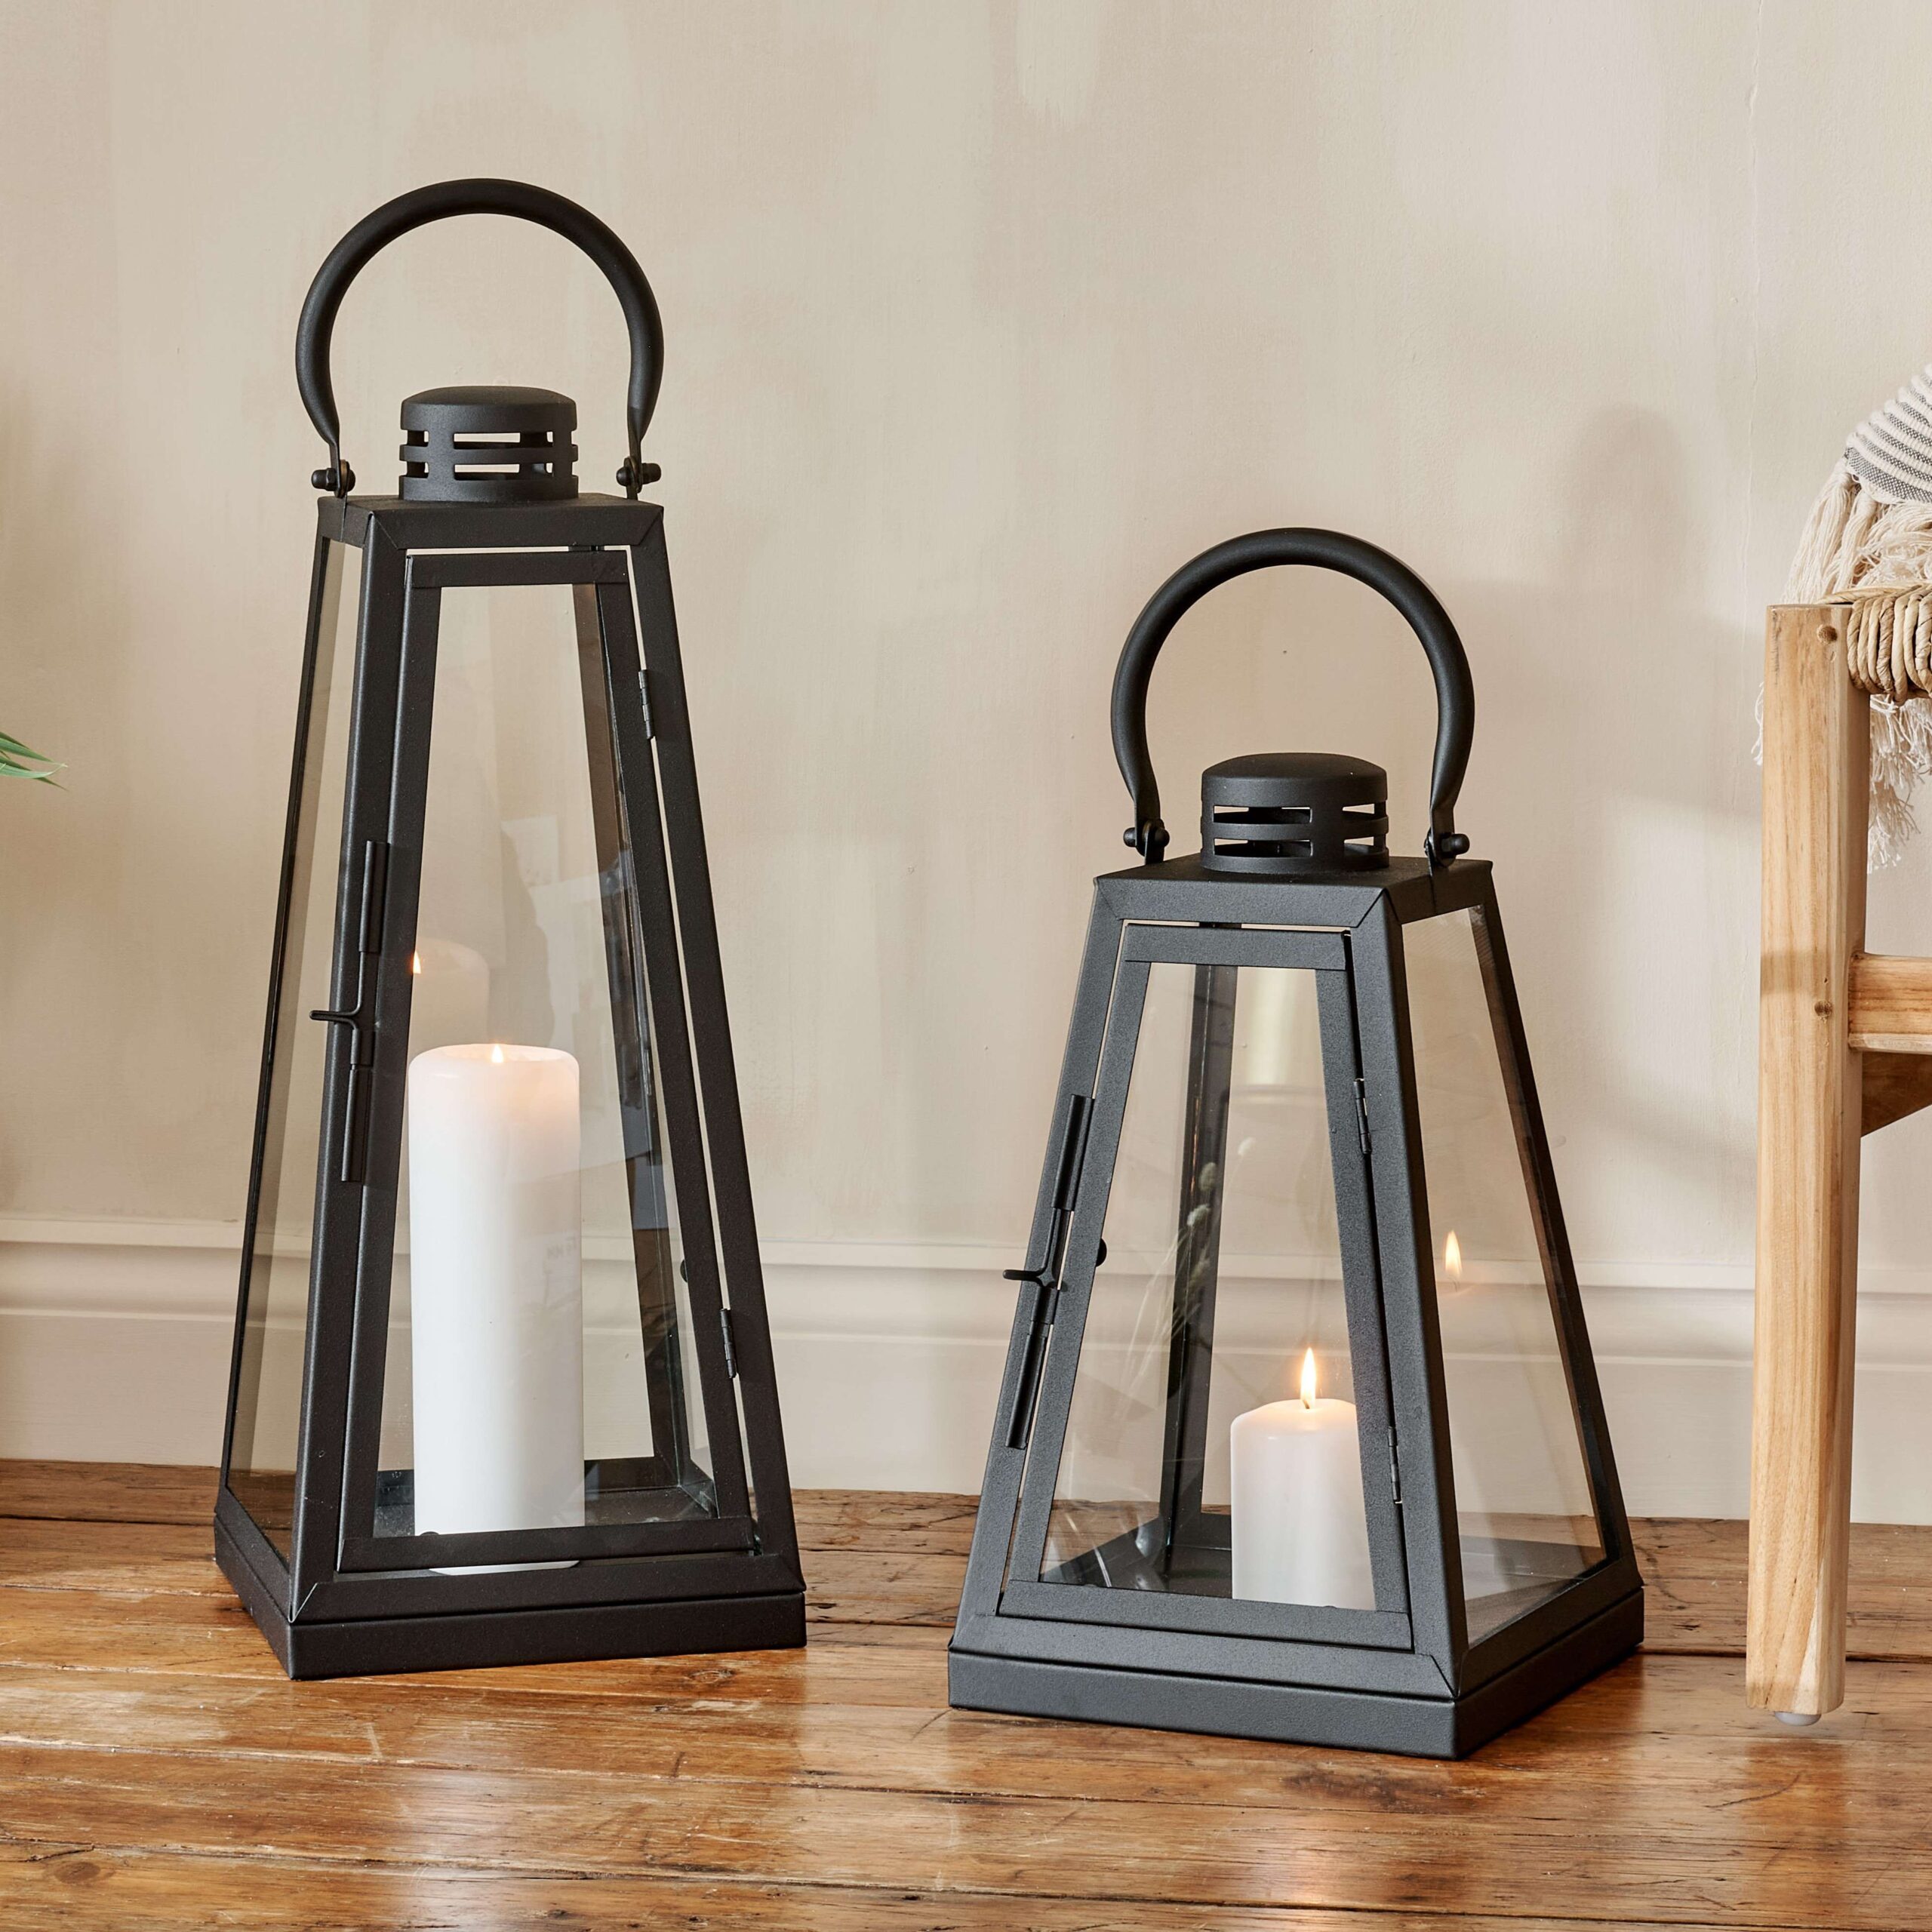 black candle lanterns on wooden floor with chair leg